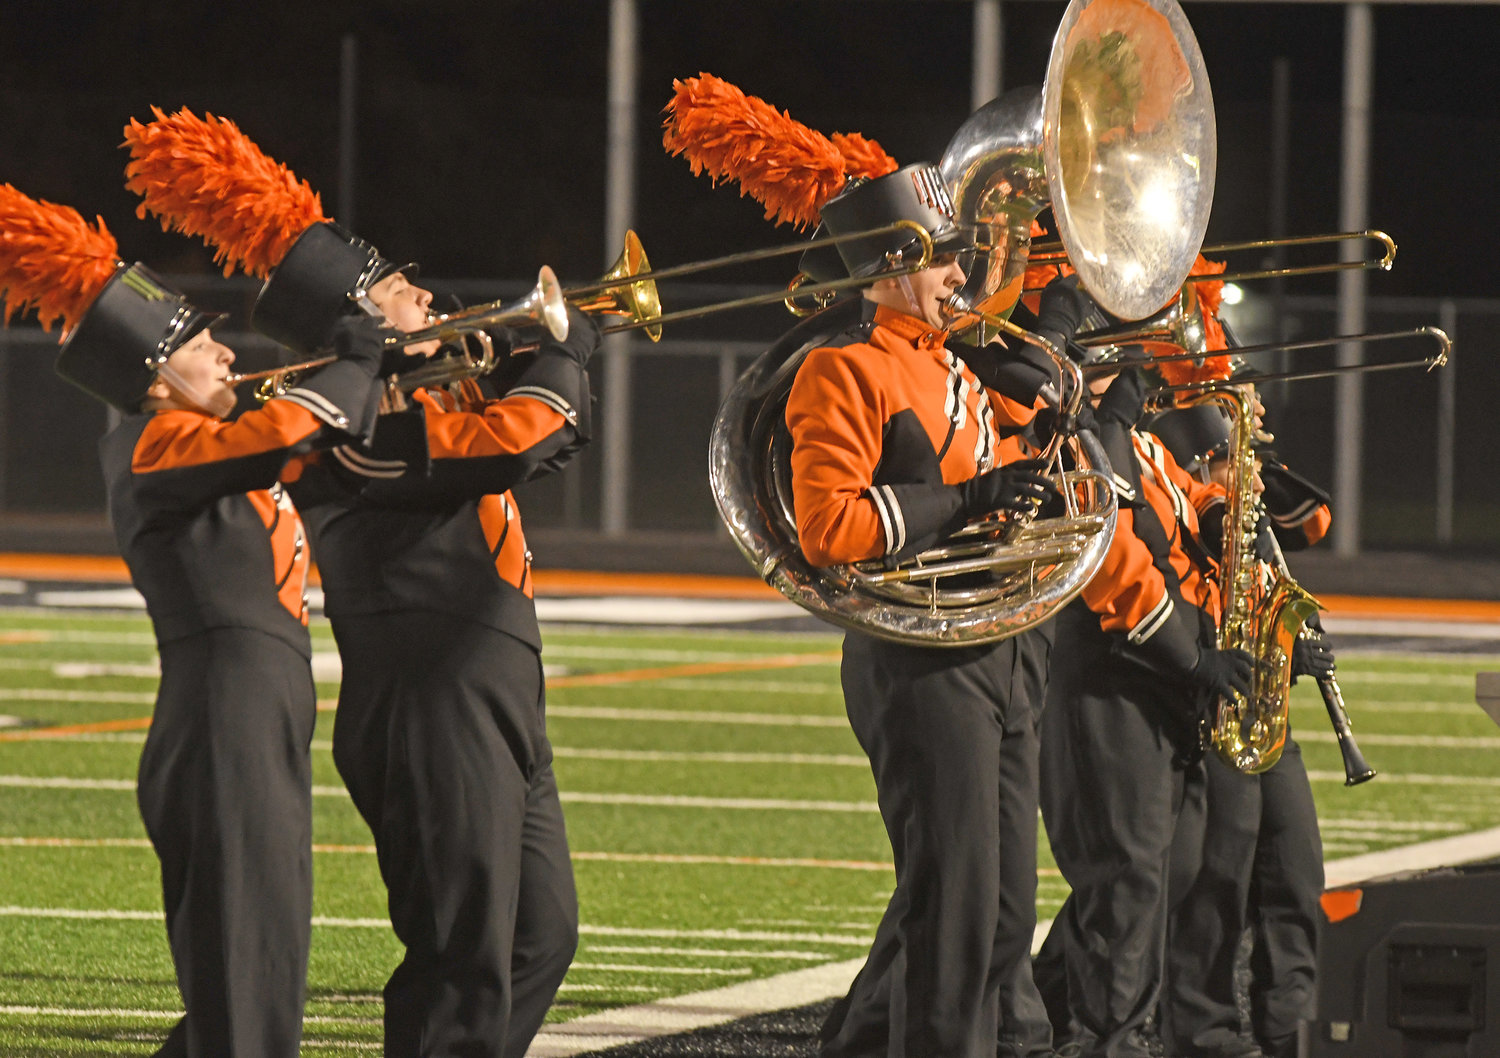 RFA Marching band during their performance Wednesday night